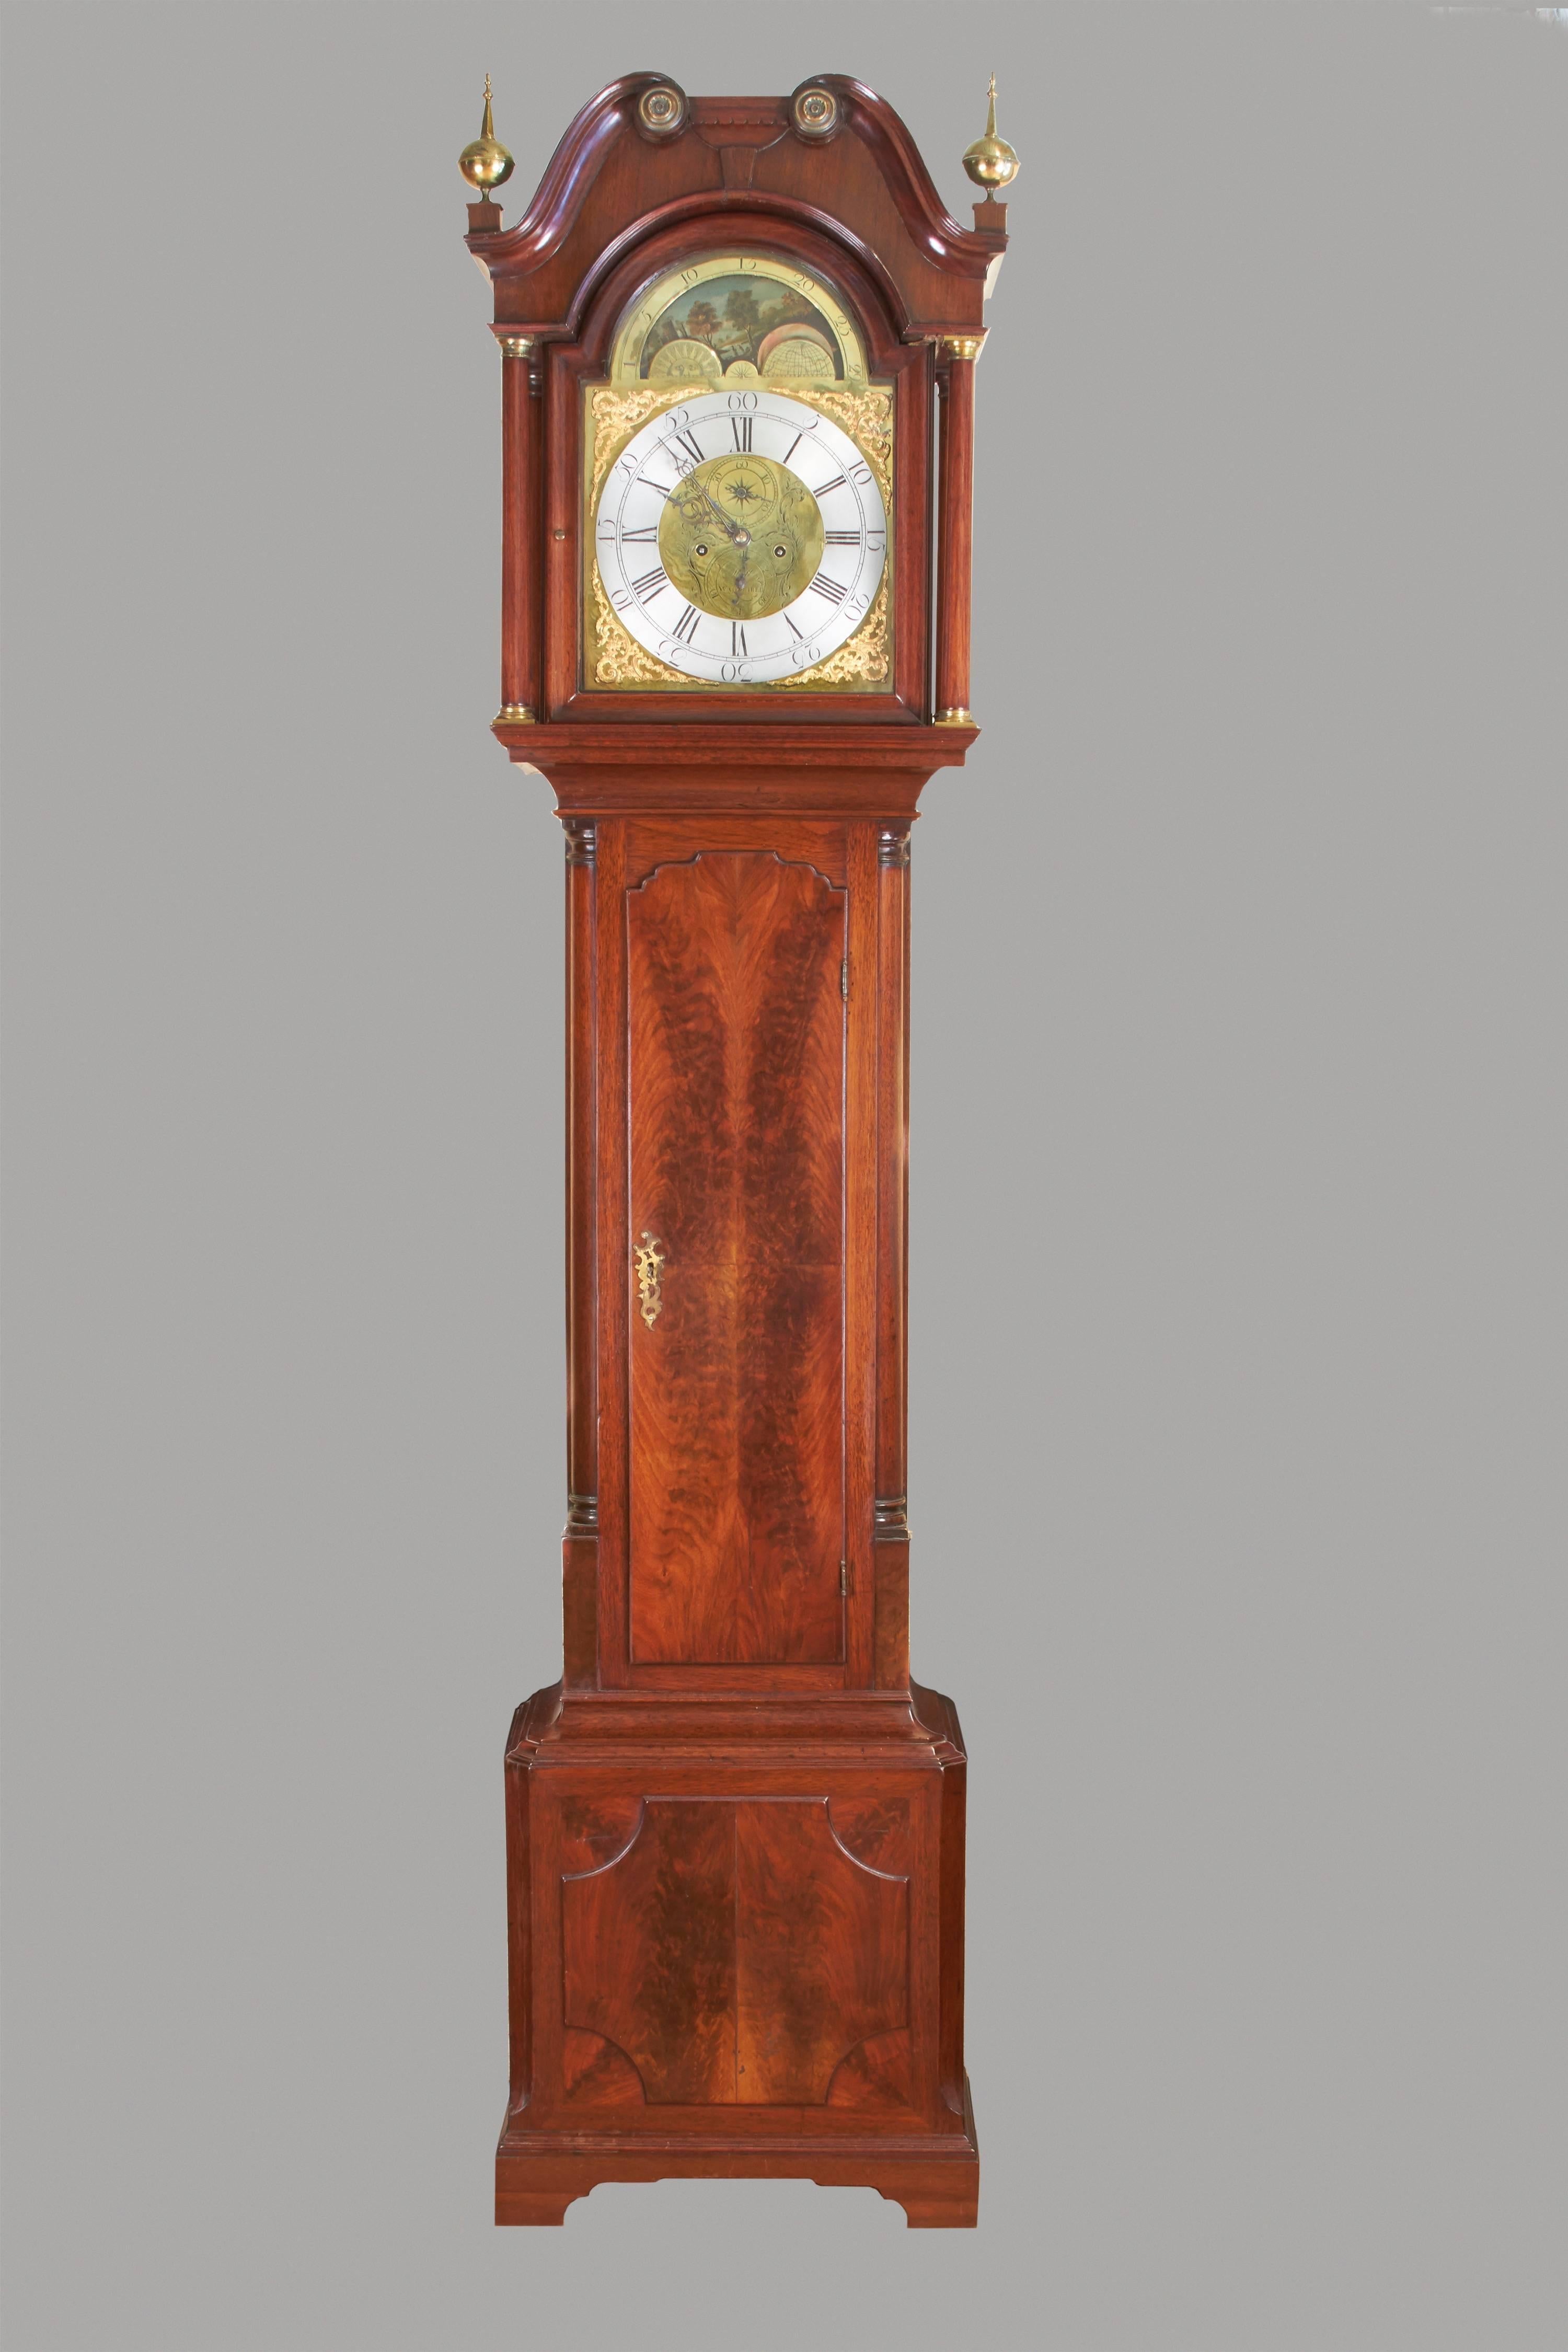 A good late Georgian period mahogany tall case clock with an 8 day time and strike movement, the brass face with a silvered chapter ring and Roman numeral dial, functional moon phase, calendar and second hand, signed Stott Wakefield,
circa